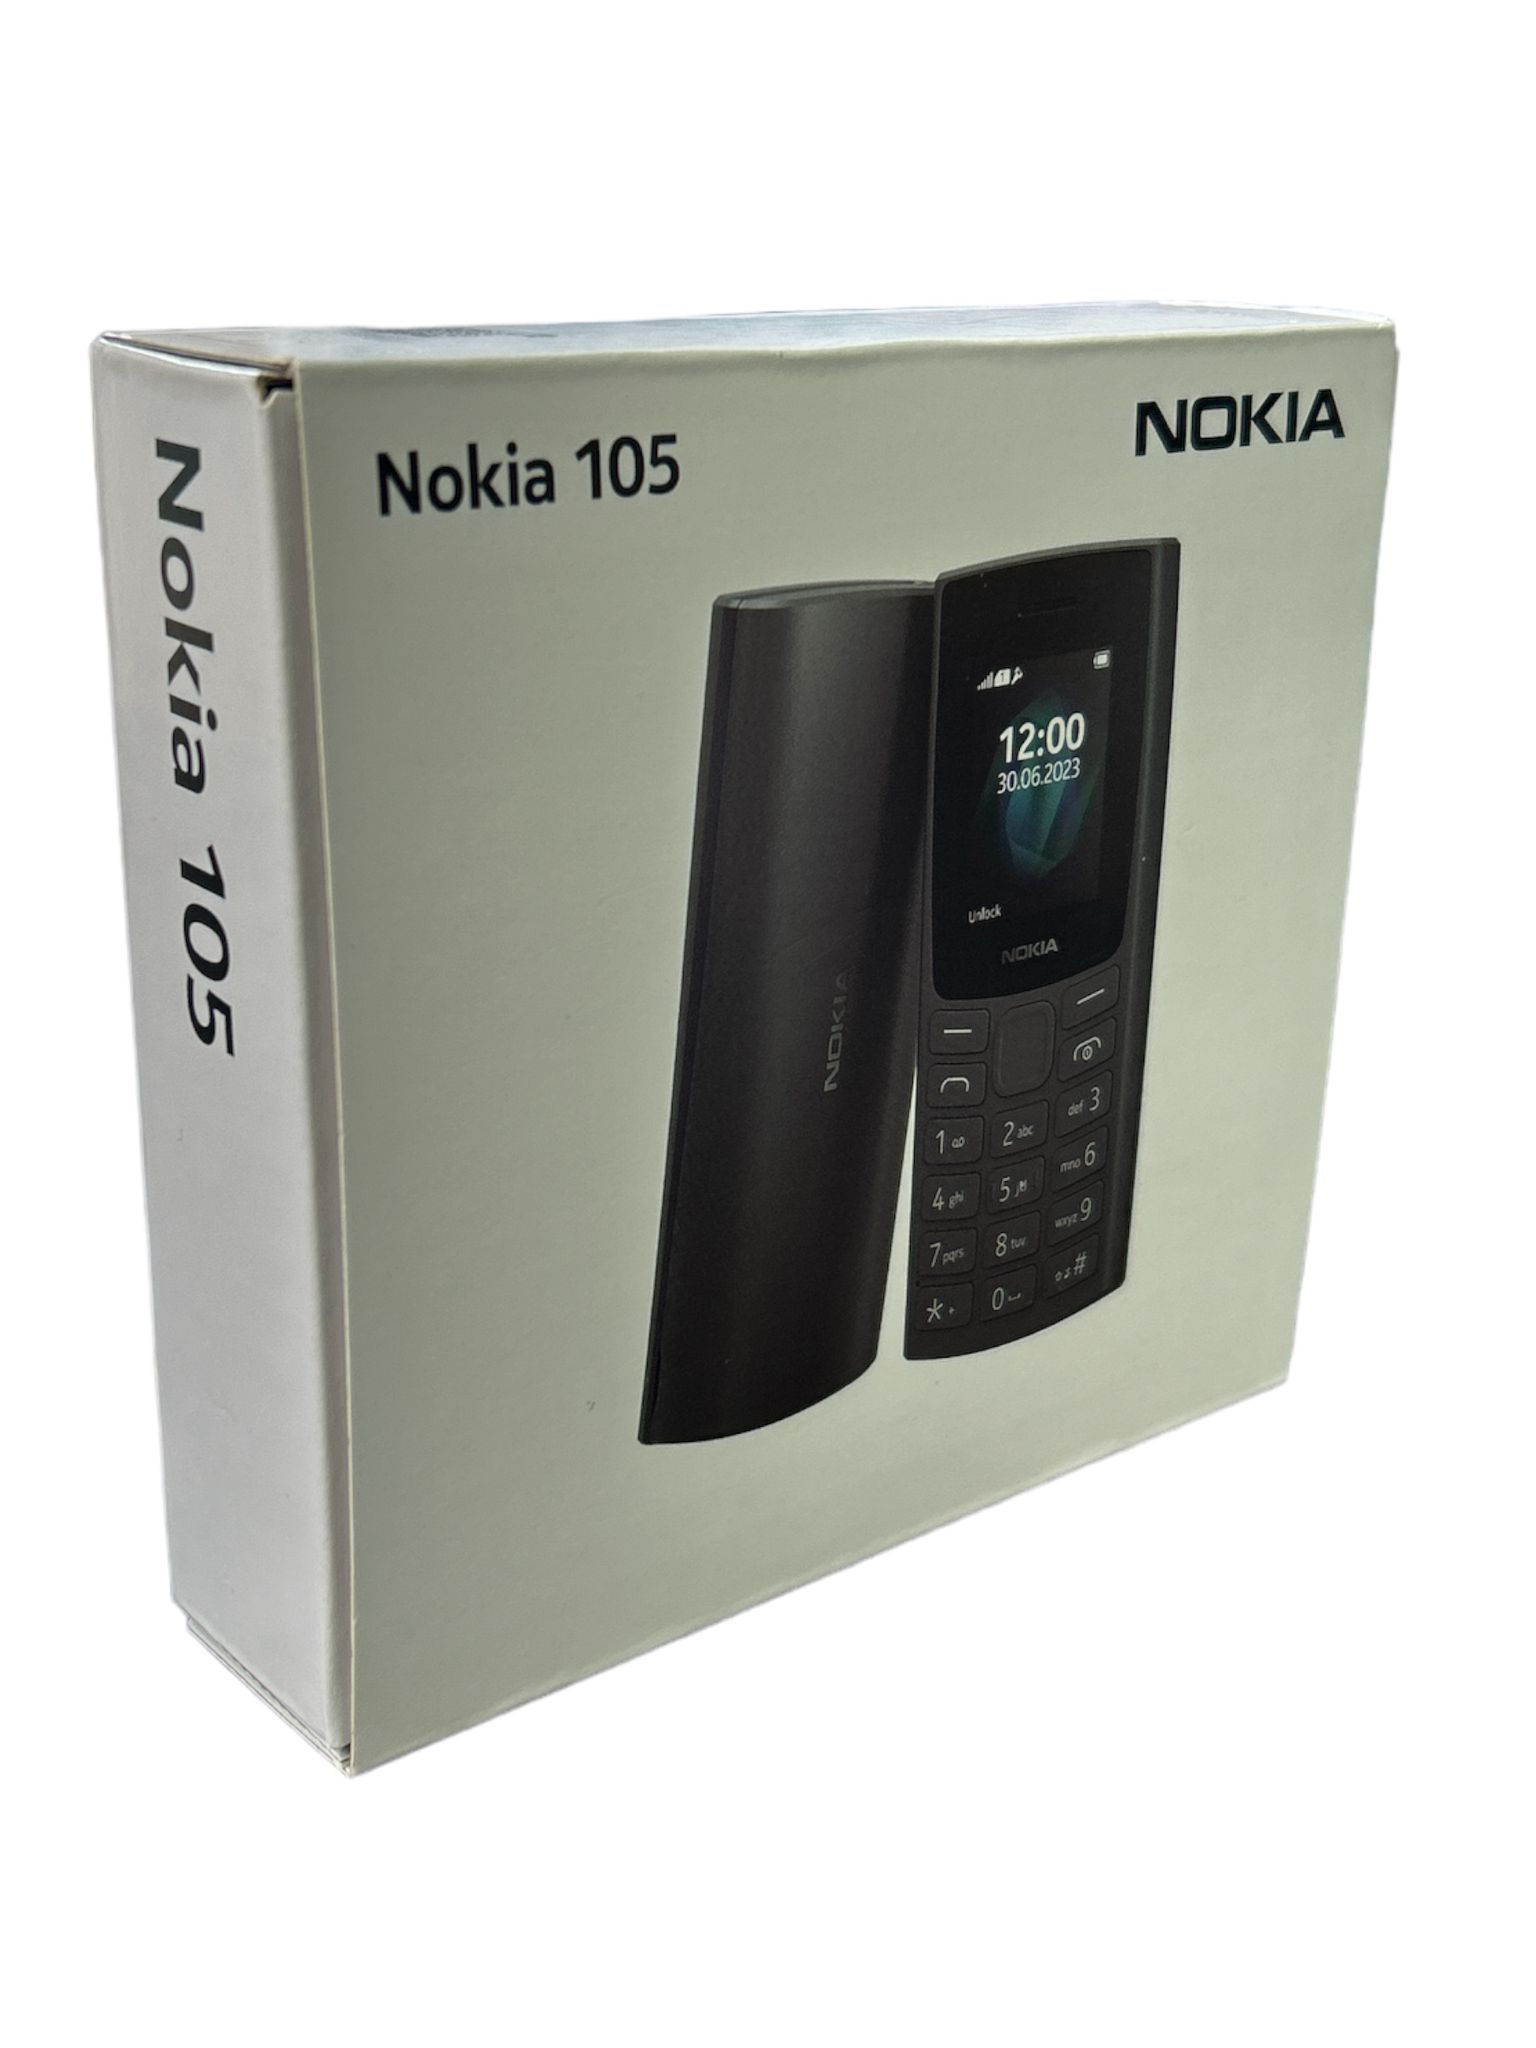 Nokia 105 2023 edition - New in box